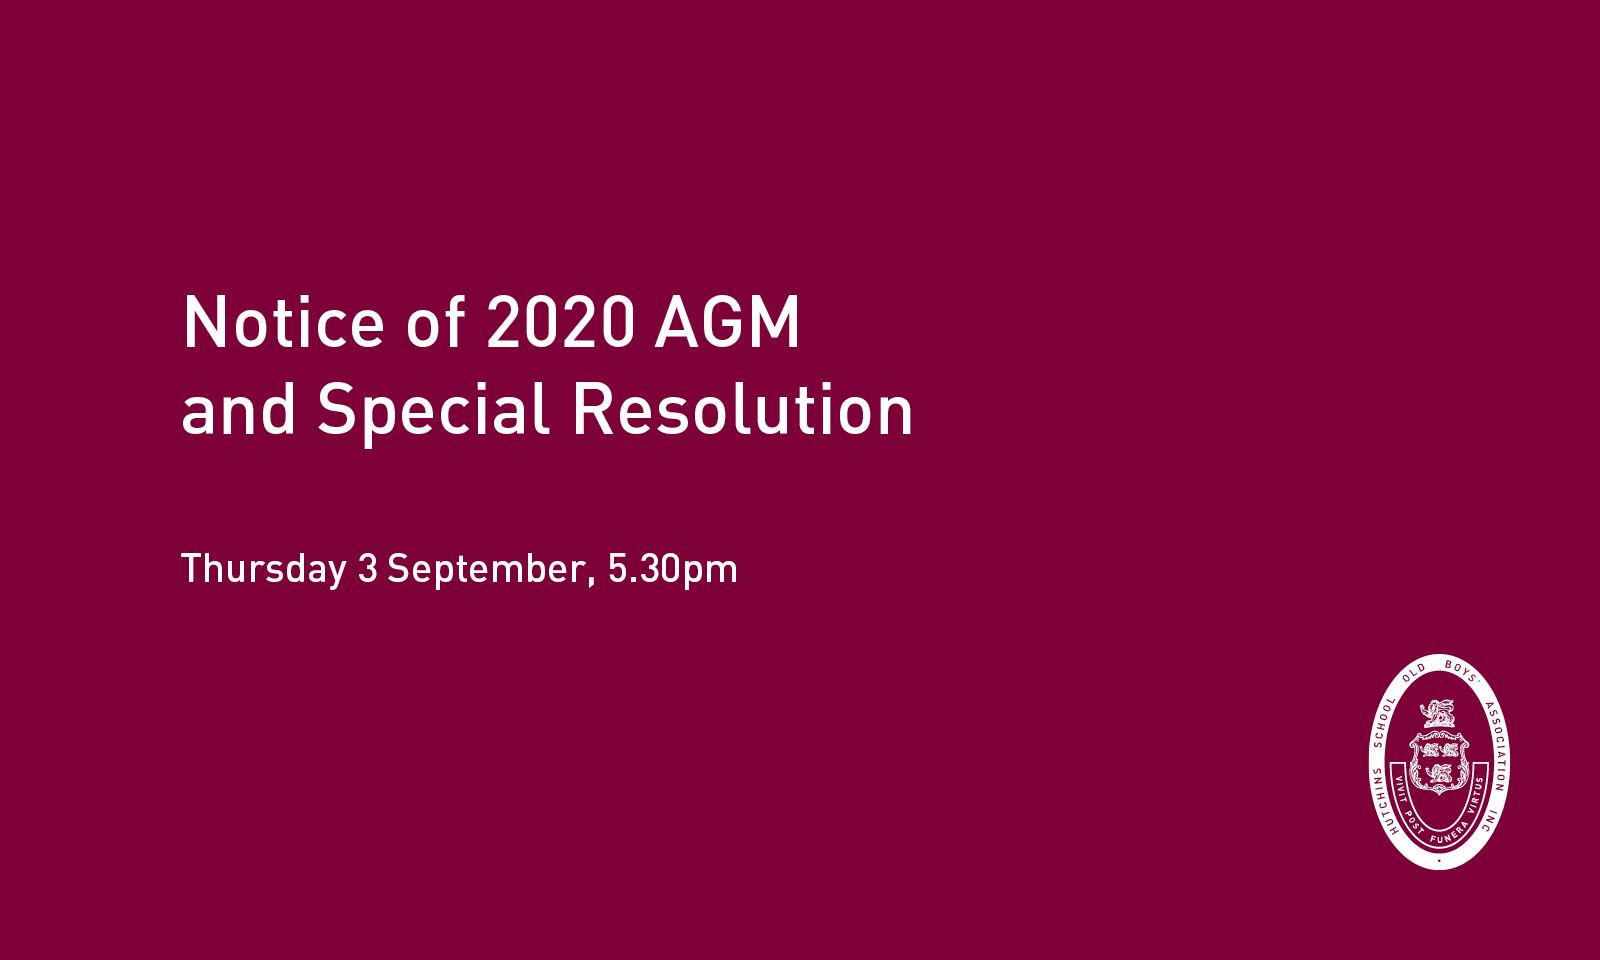 HSOBA Noitce of AGM and Special Resolution, 5.30pm, Thursday 3 September 2020